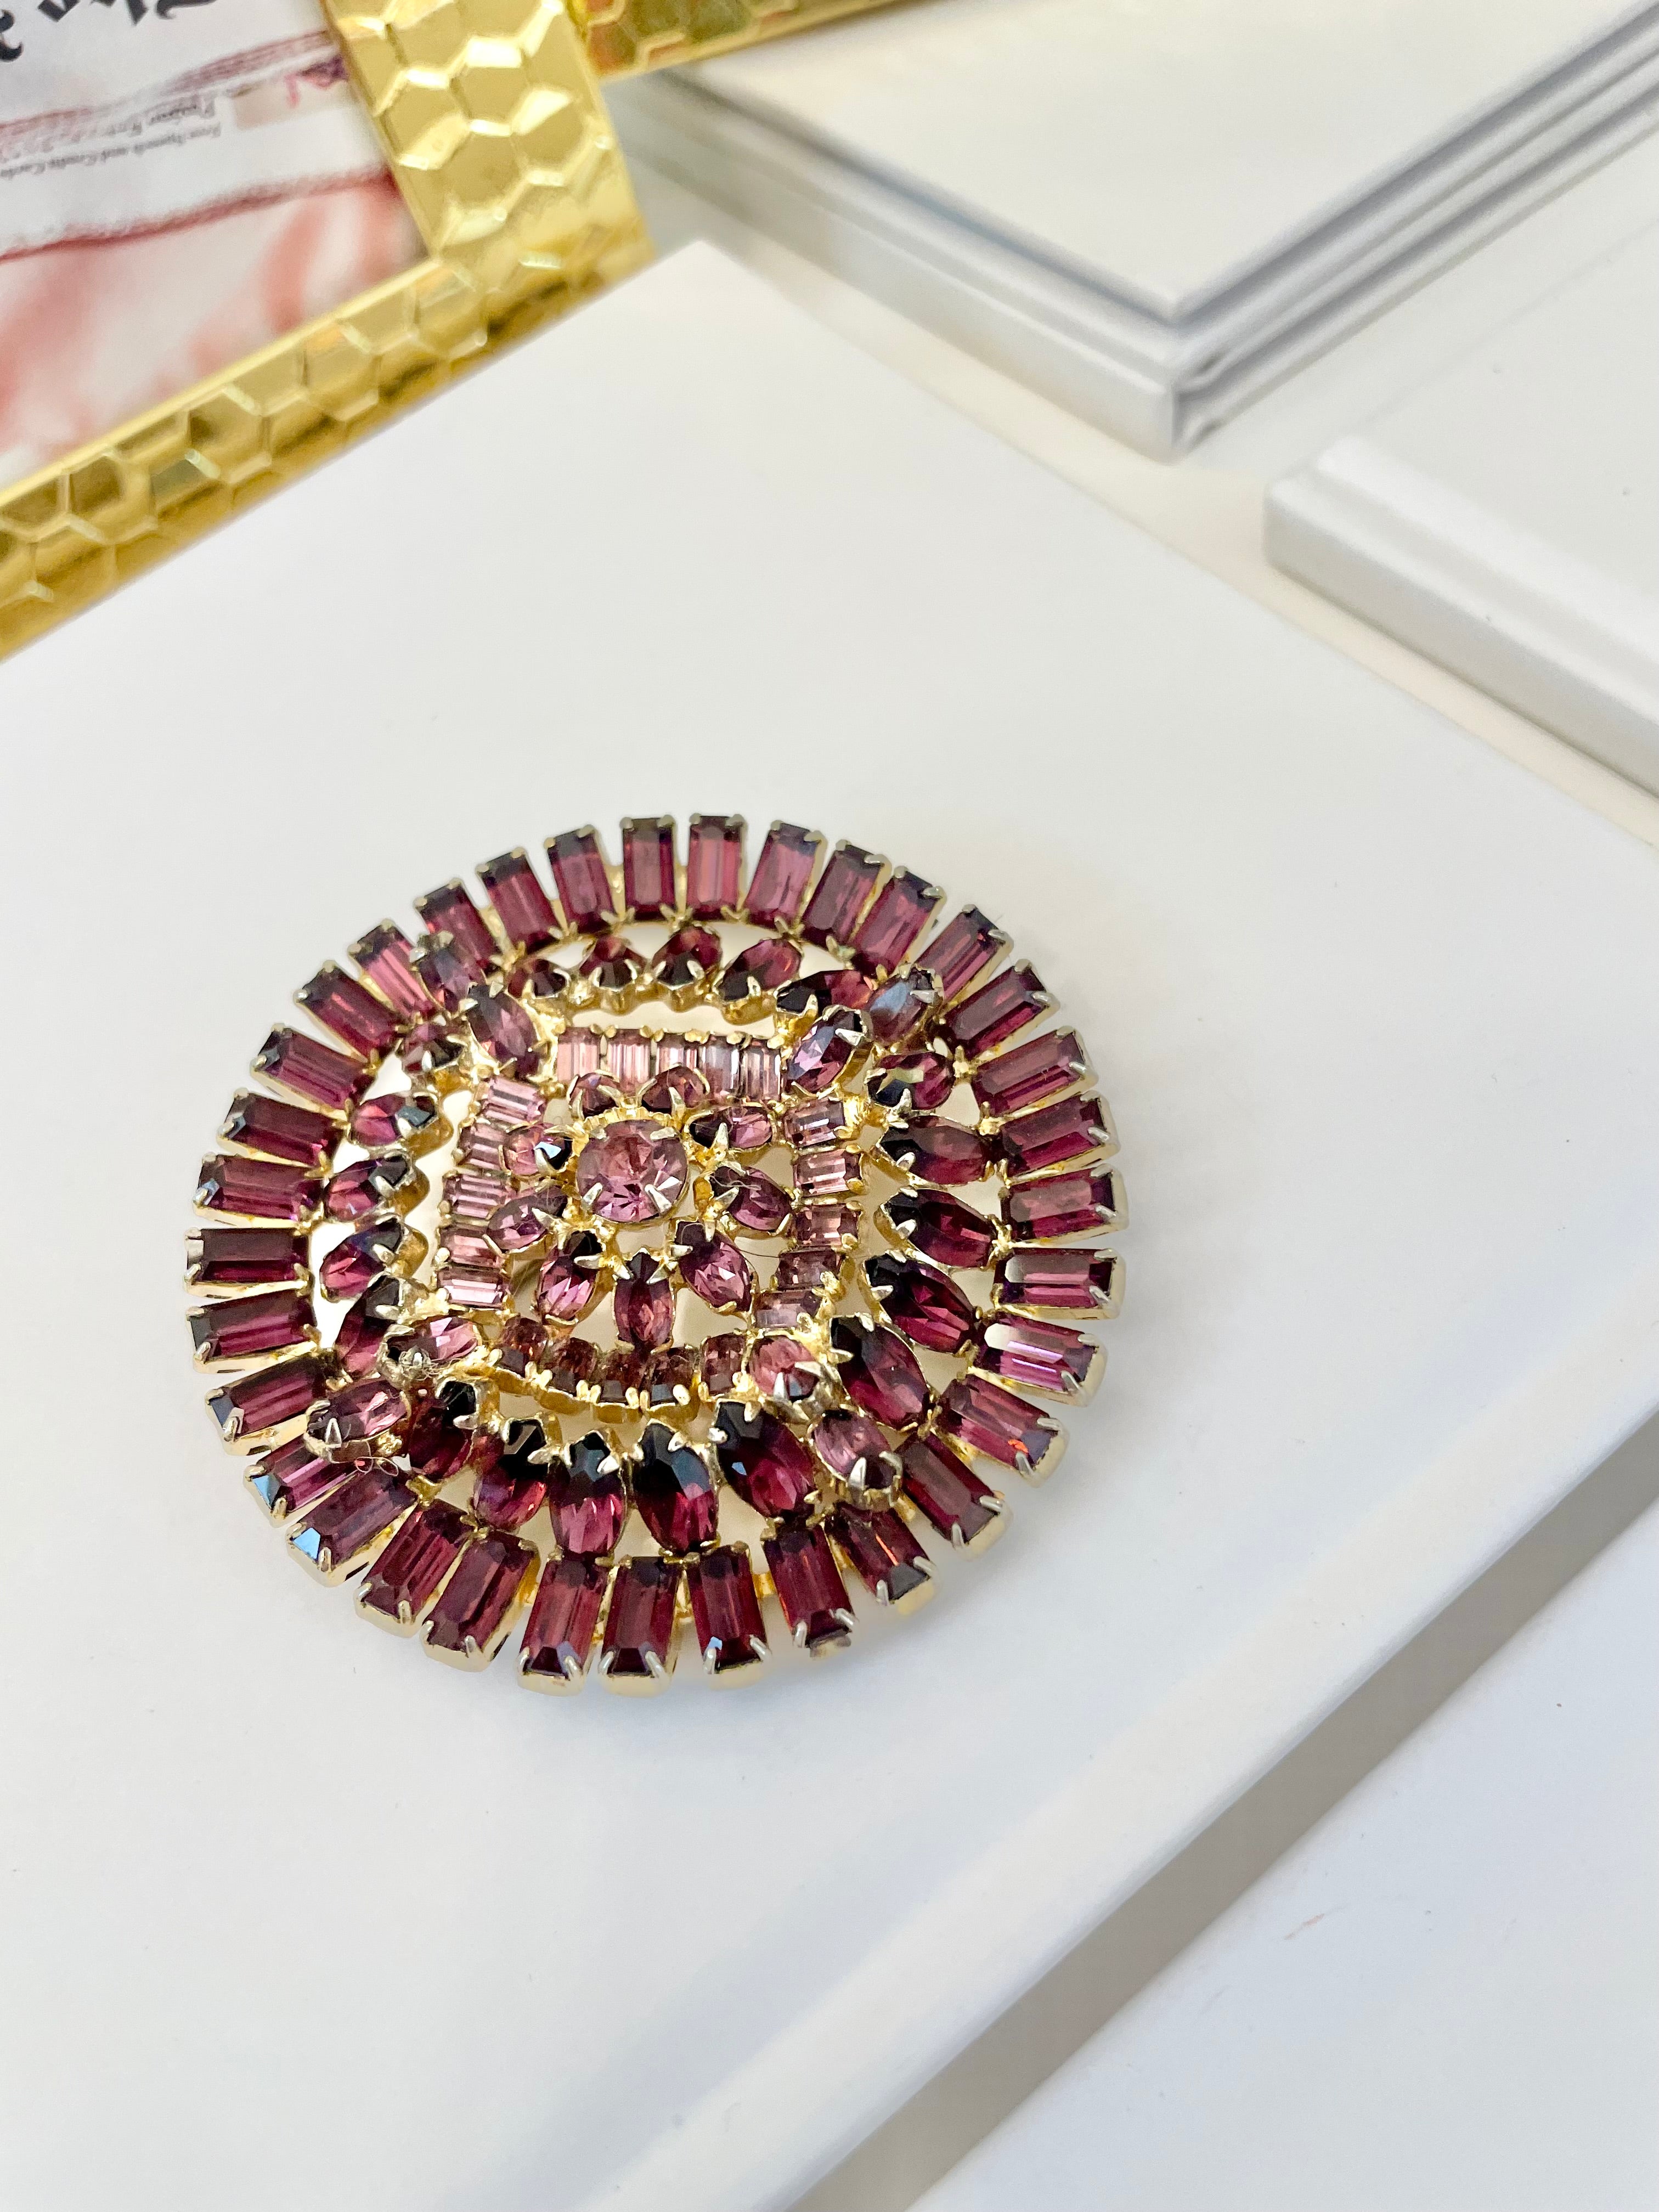 The lady can't say no to a beautiful brooch! This one is stunning..